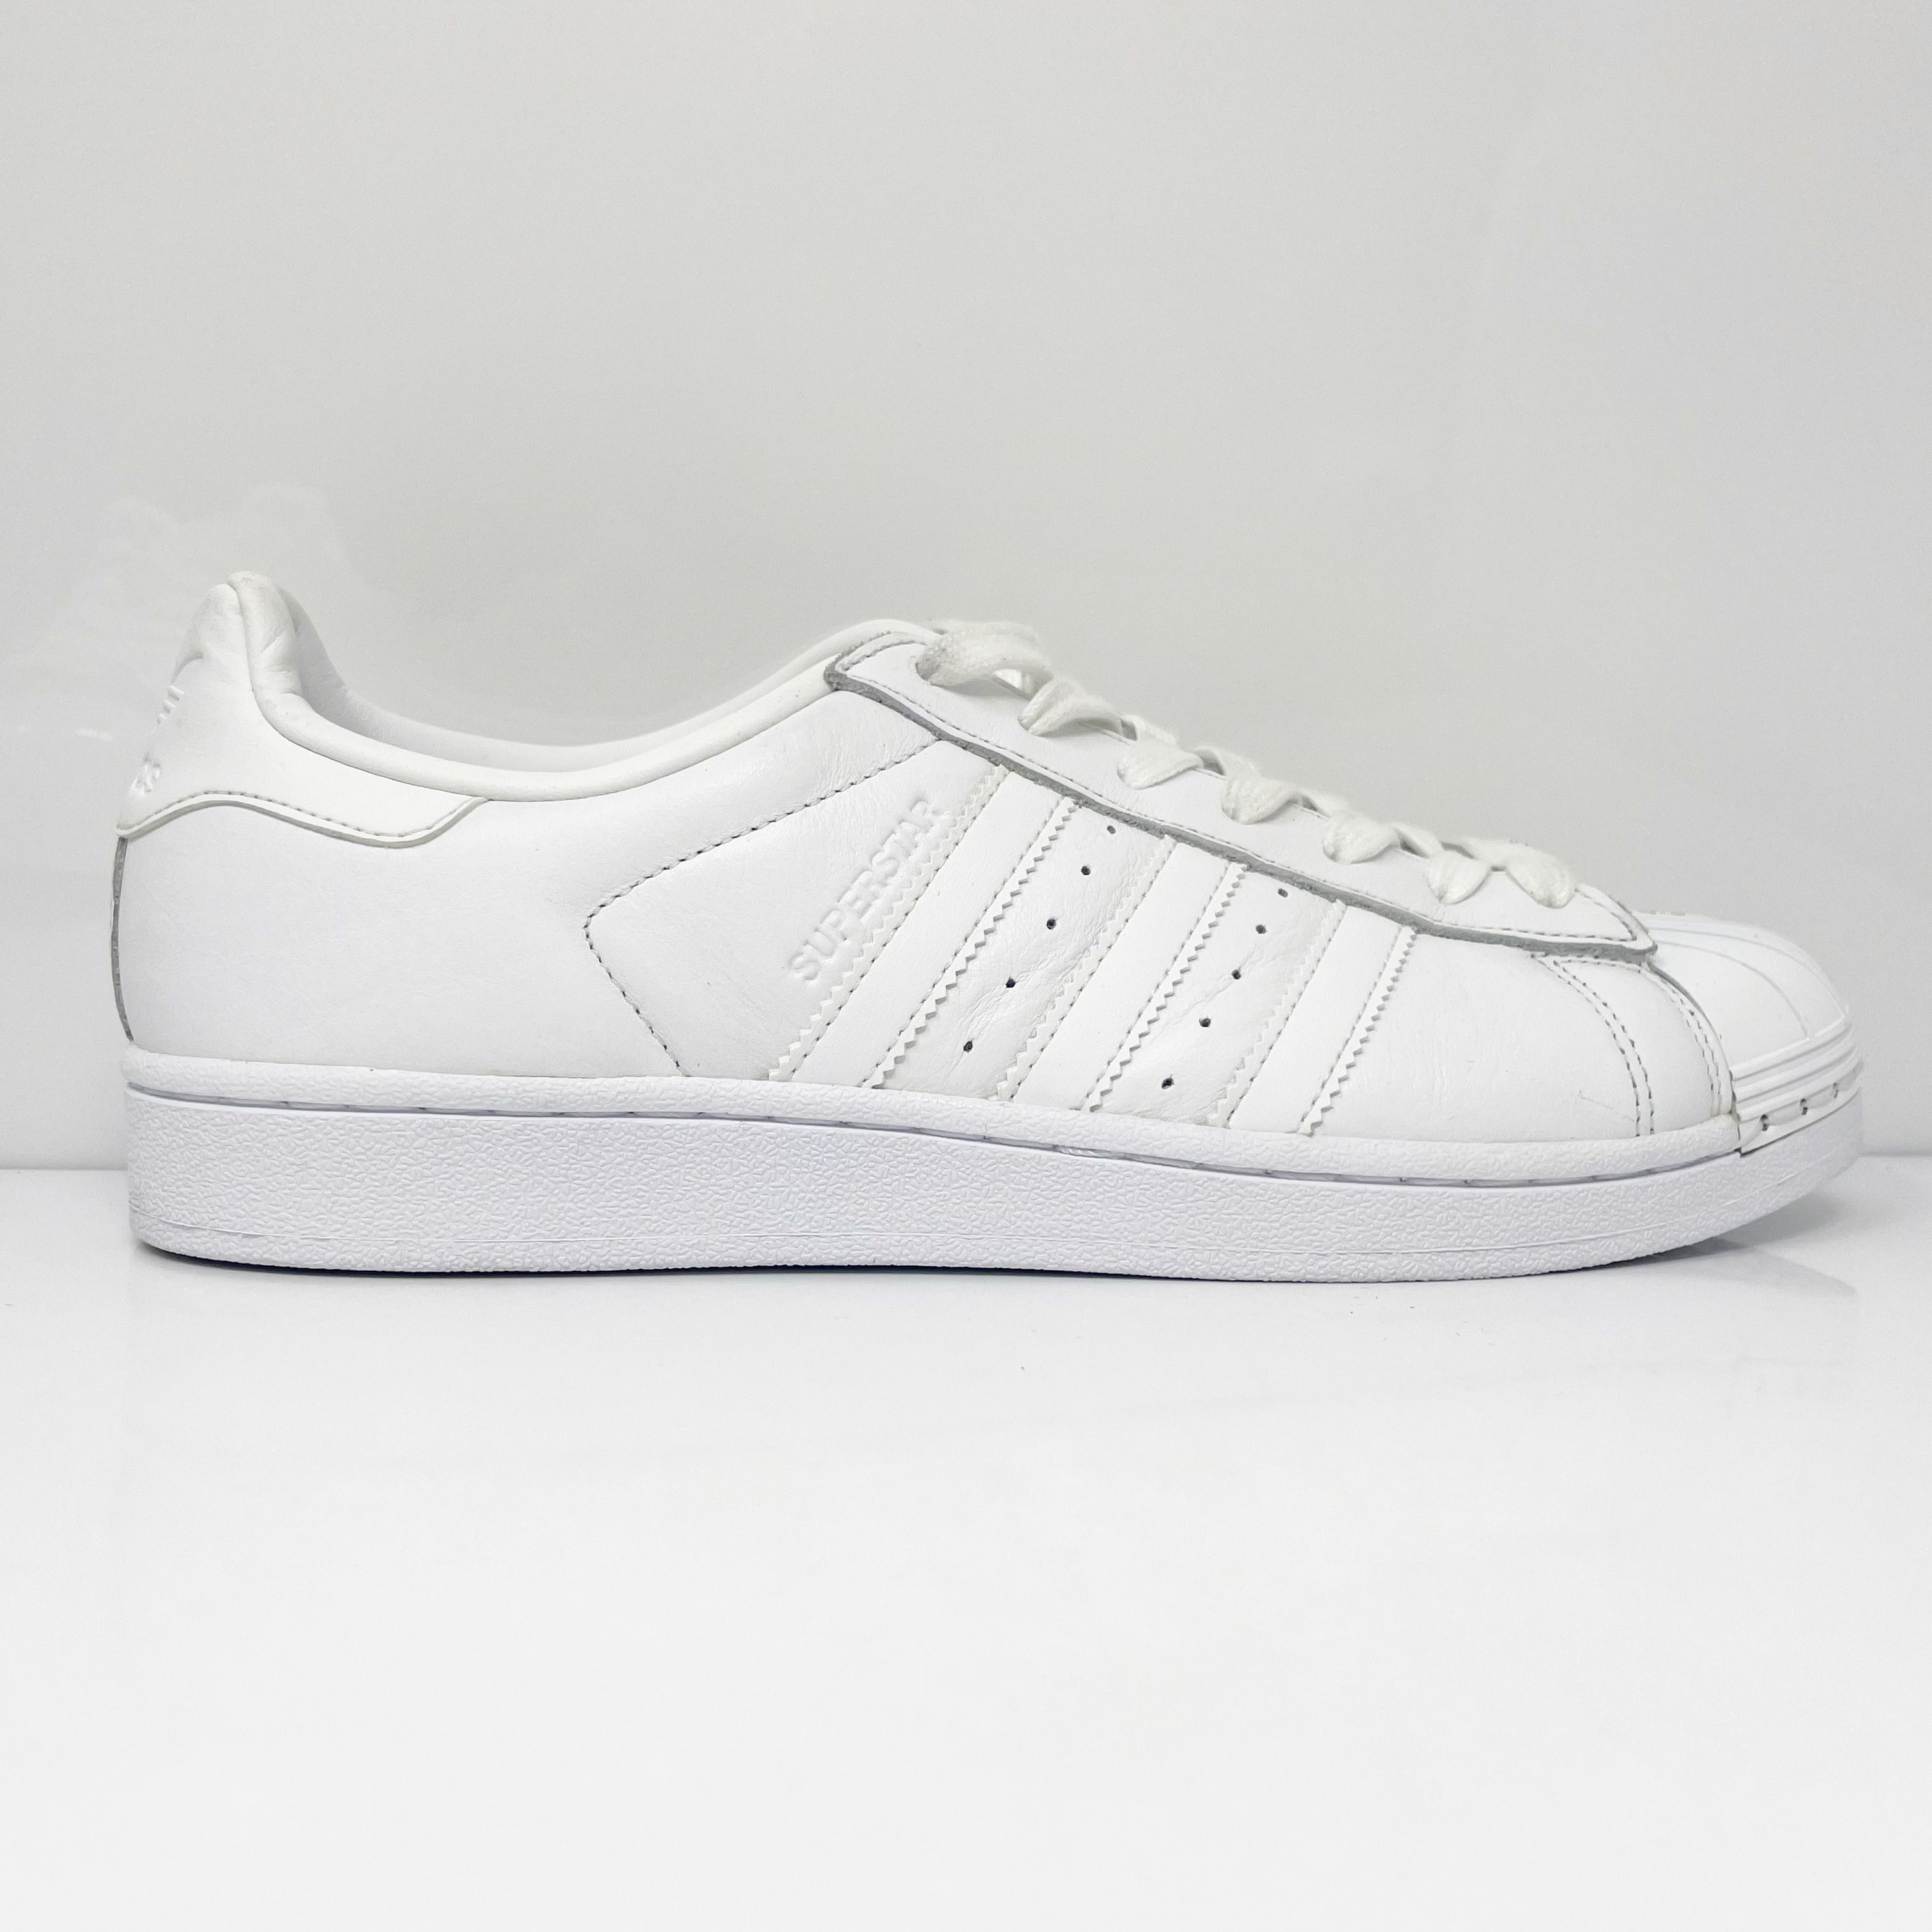 Adidas Womens Superstar BY9751 White Casual Shoes Sneakers Size 9.5 | eBay